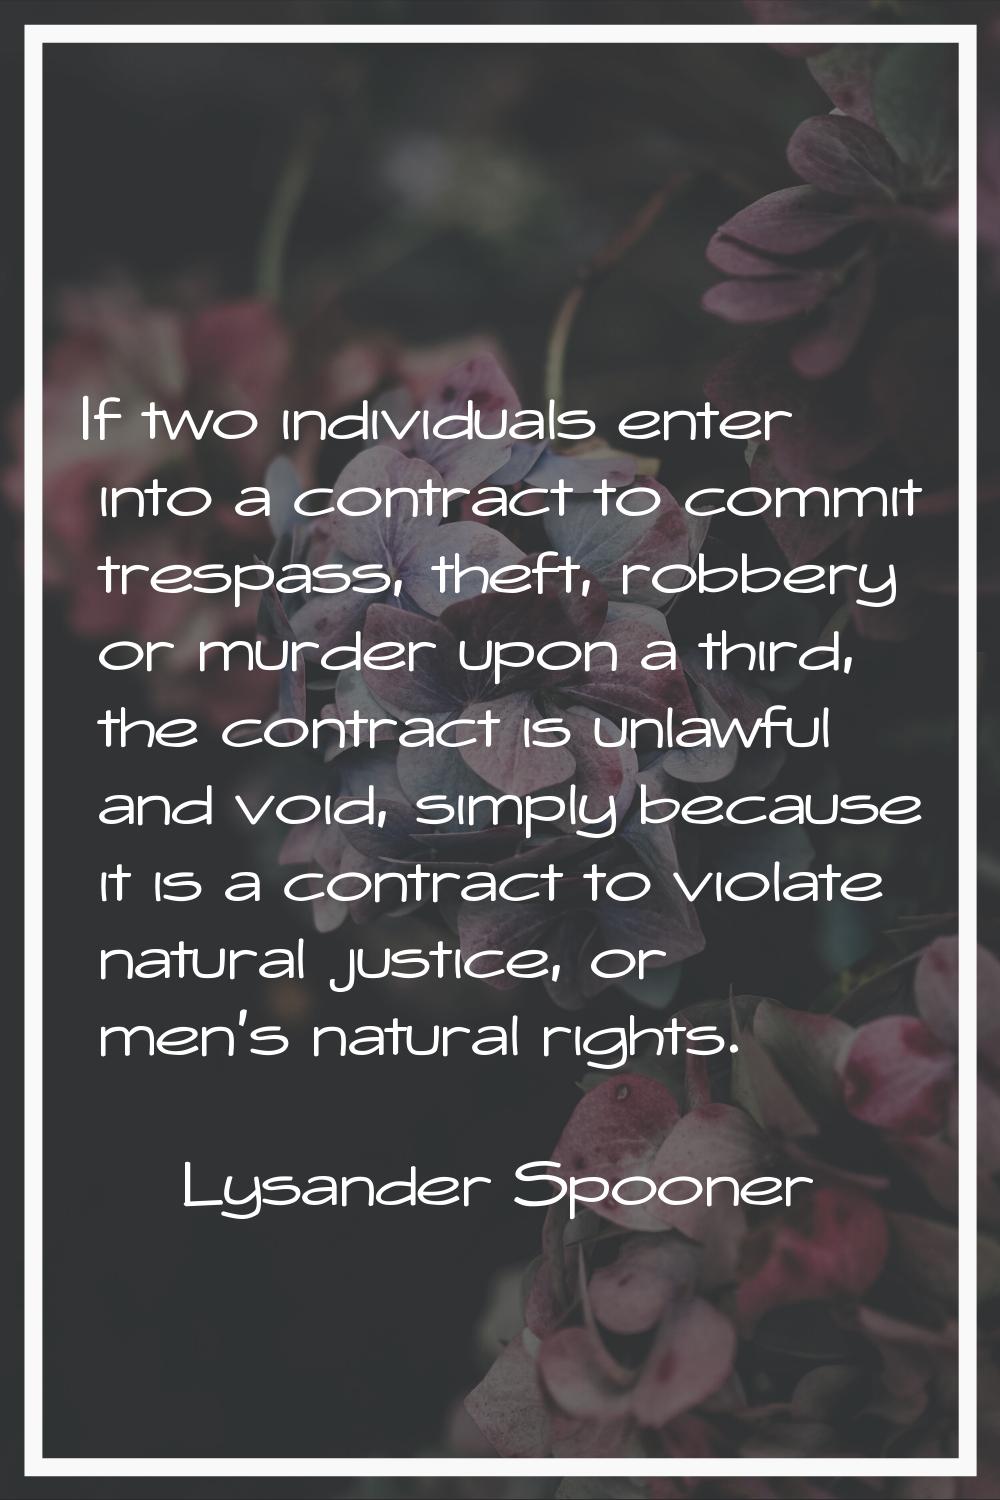 If two individuals enter into a contract to commit trespass, theft, robbery or murder upon a third,